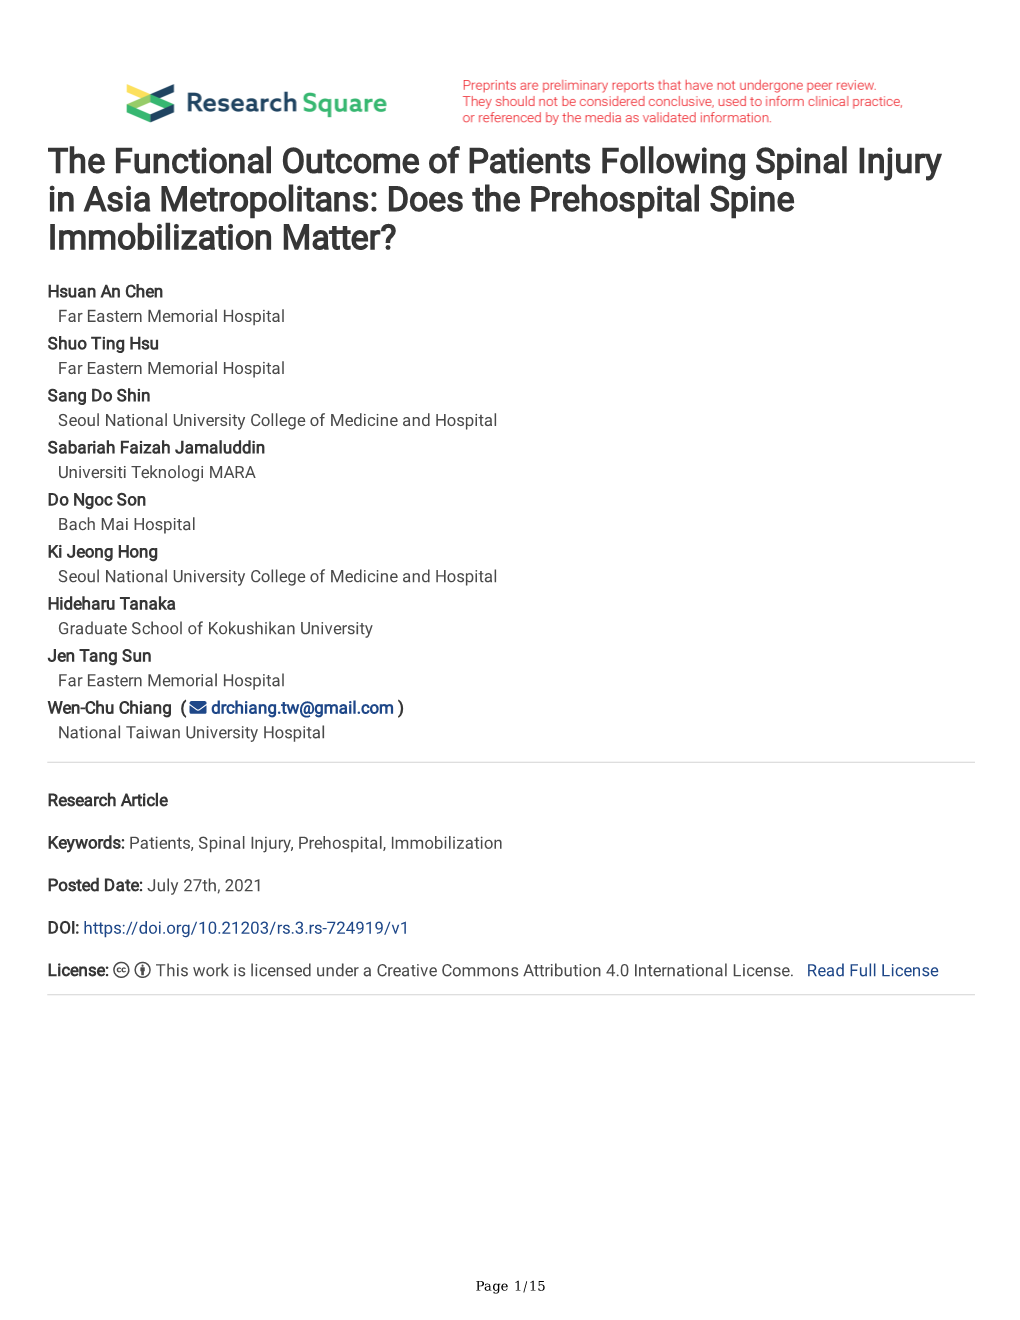 The Functional Outcome of Patients Following Spinal Injury in Asia Metropolitans: Does the Prehospital Spine Immobilization Matter?